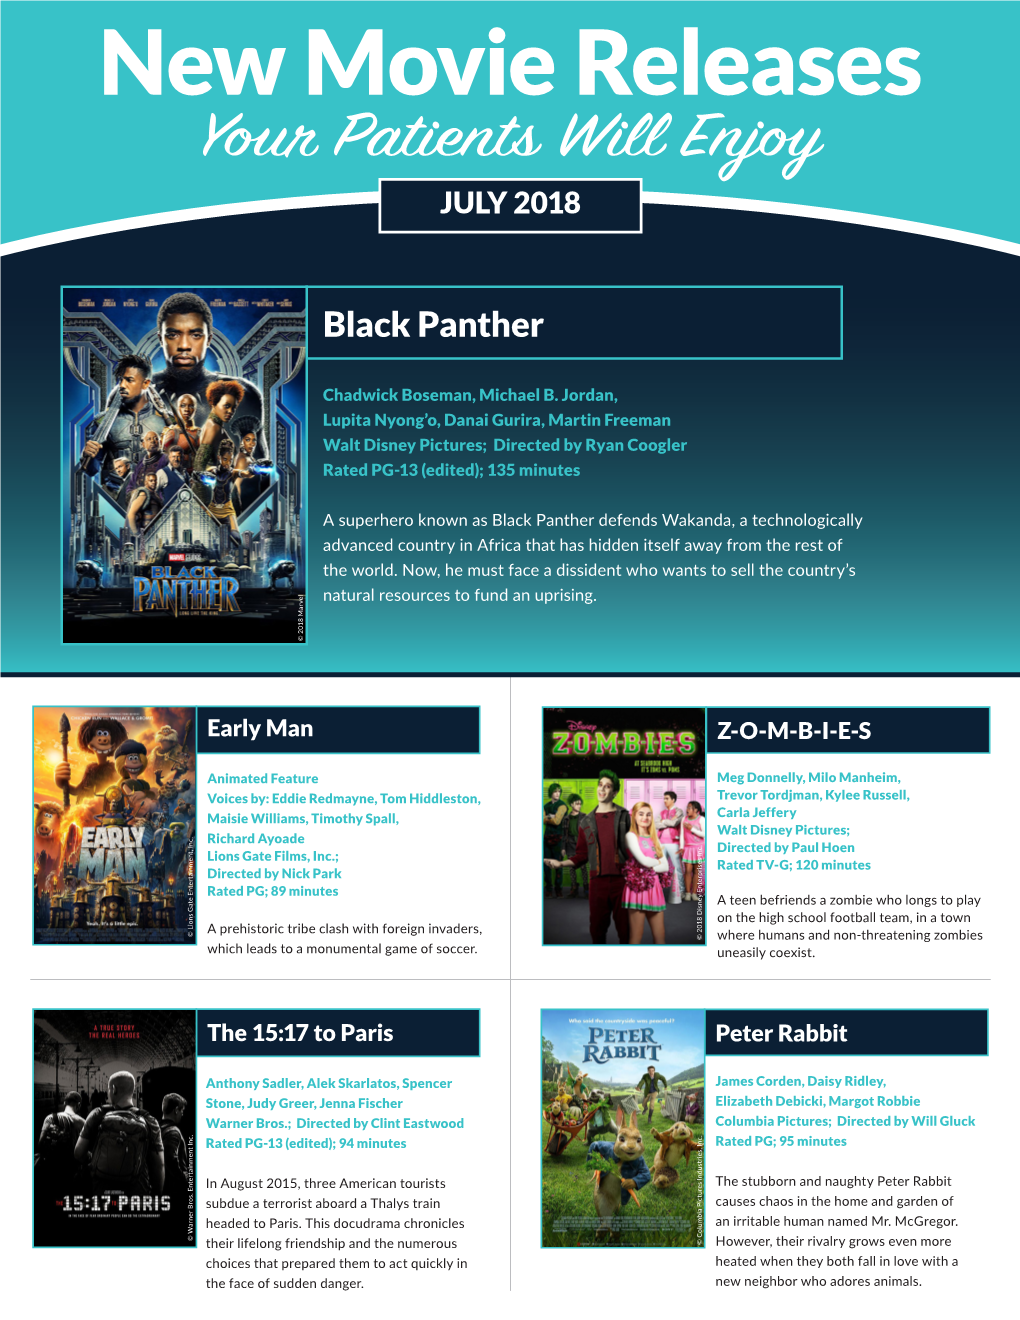 New Movie Releases Your Patients Will Enjoy JULY 2018